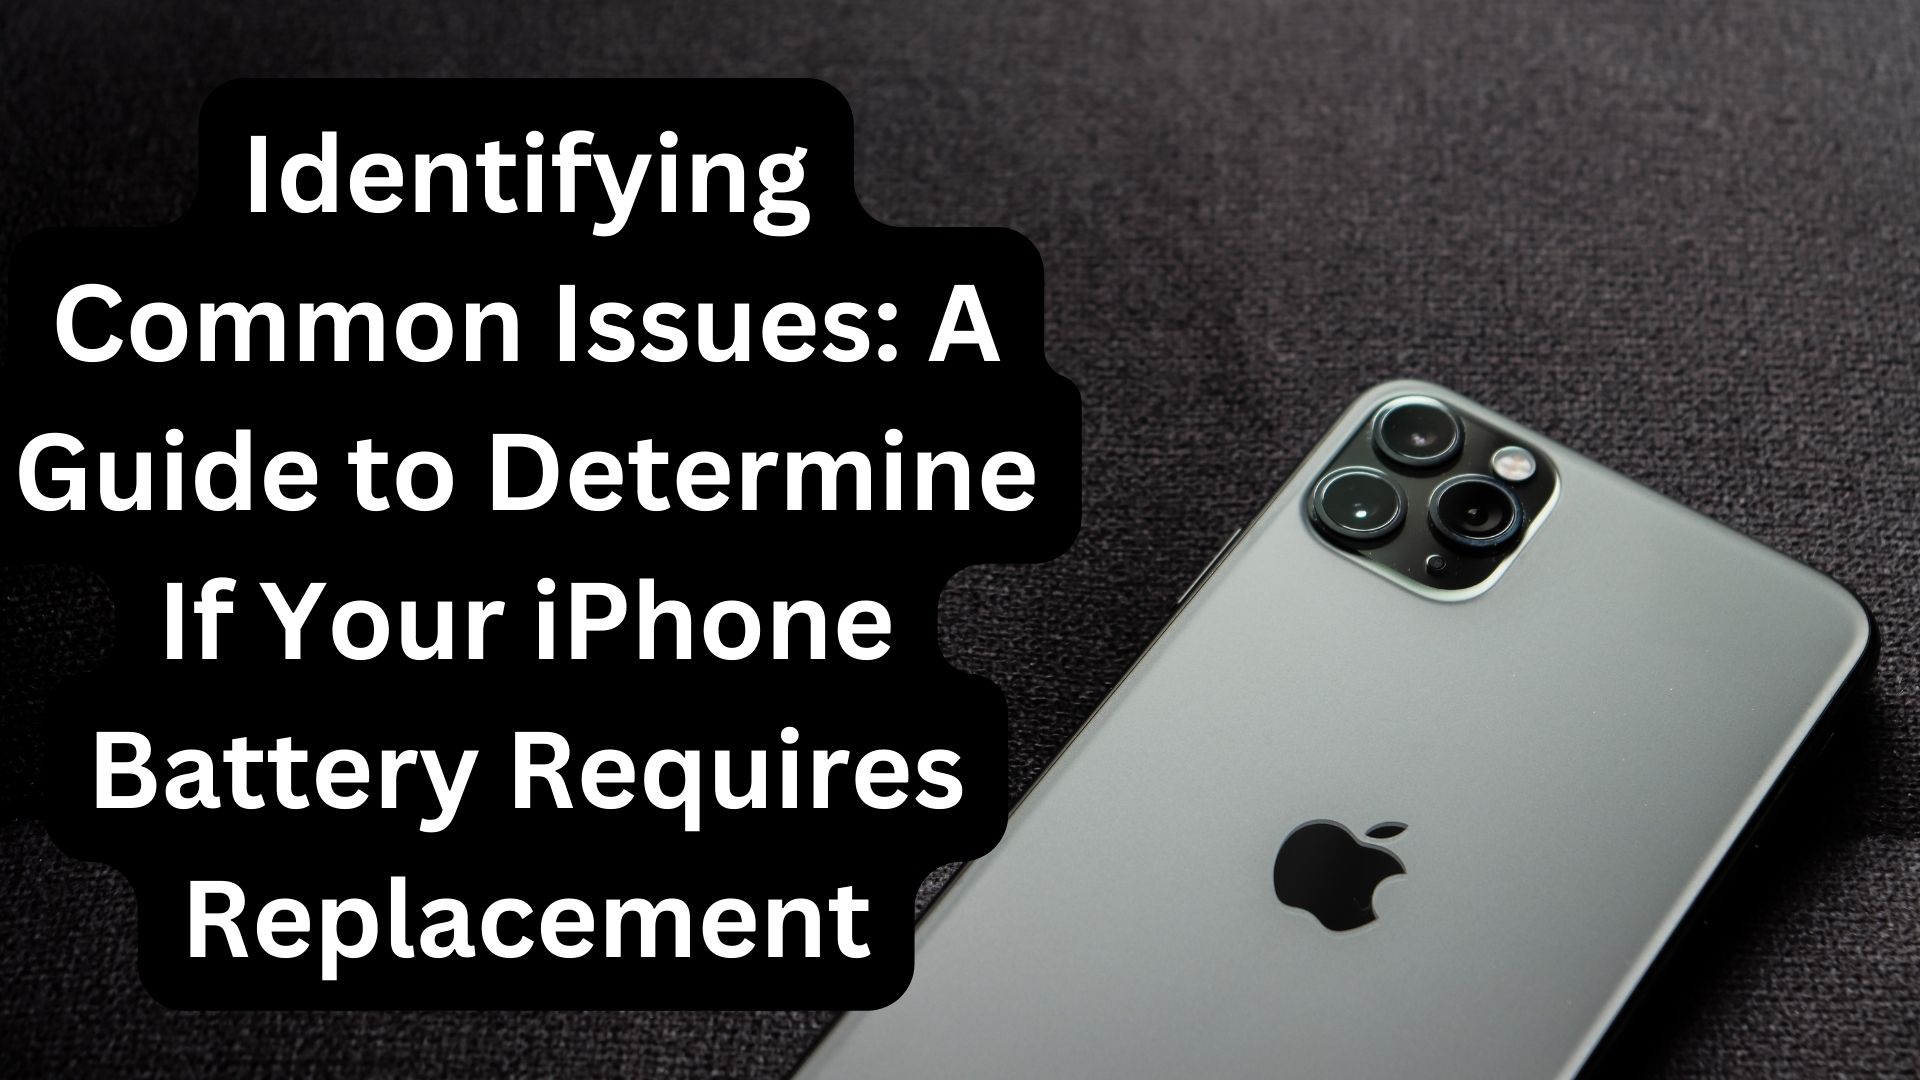 Identifying Common Issues: A Guide to Determine If Your iPhone Battery Requires Replacement